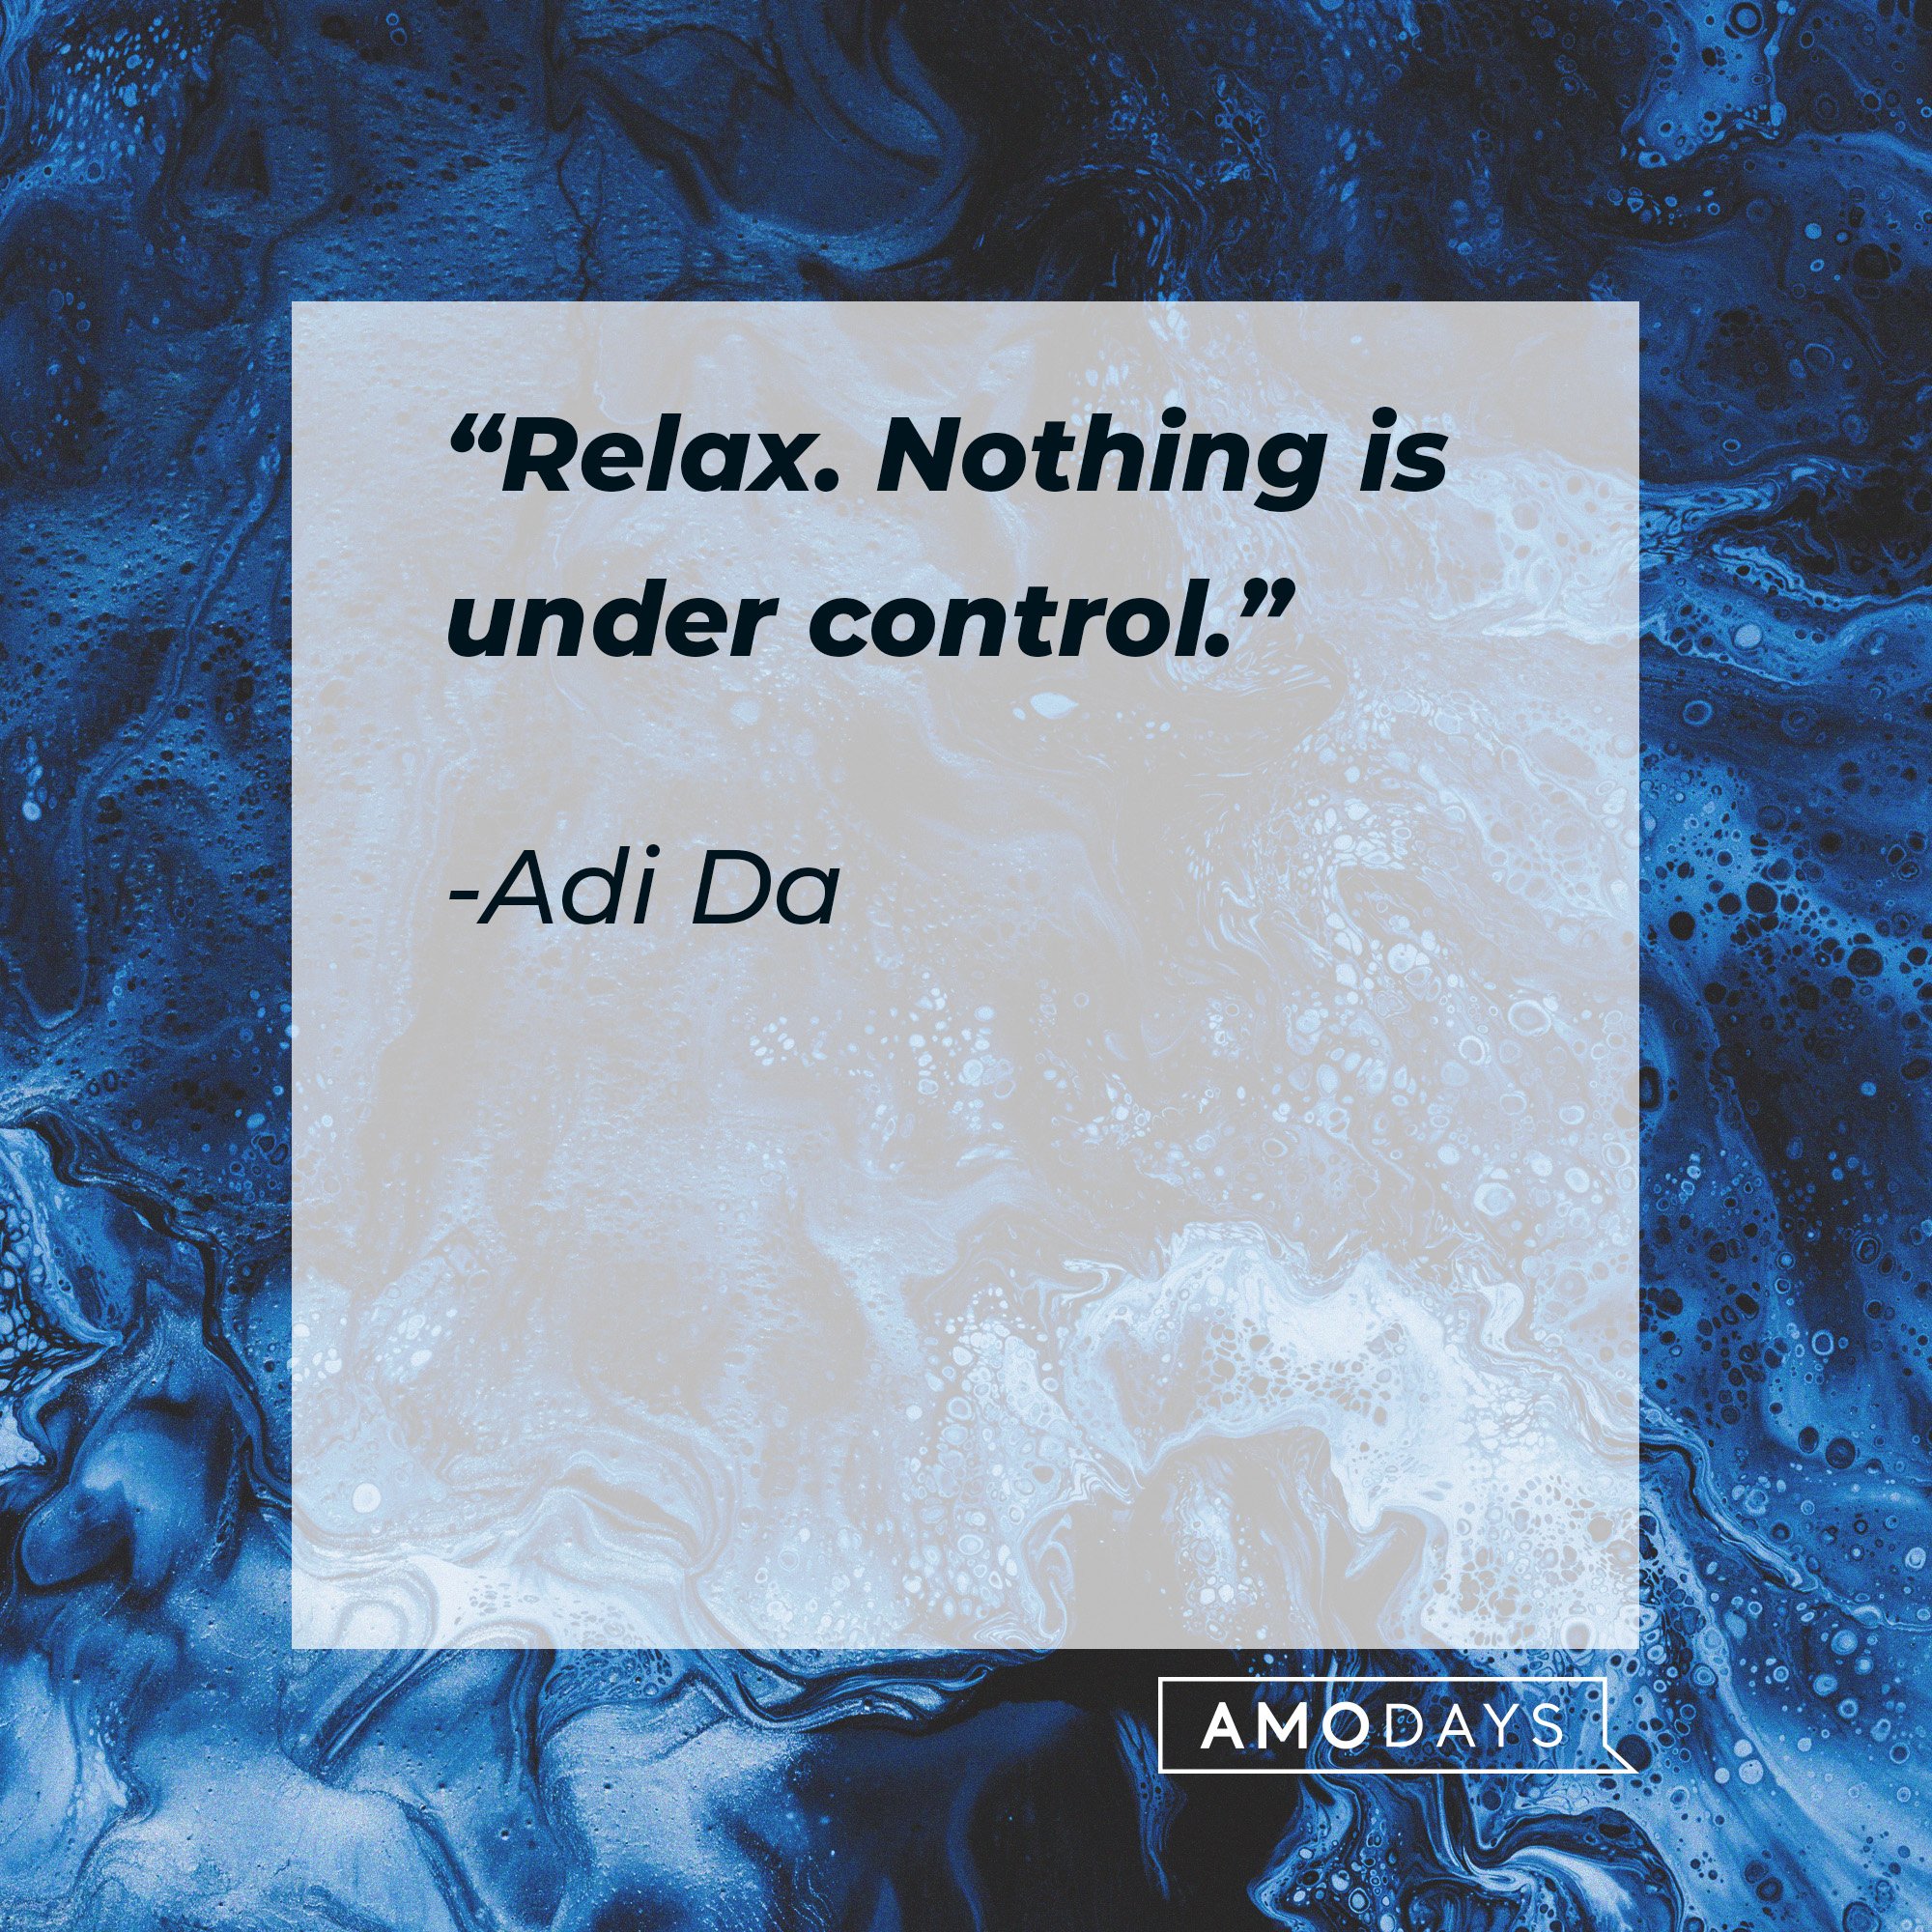 Adi Da's quote: “Relax. Nothing is under control.” | Image: AmoDays